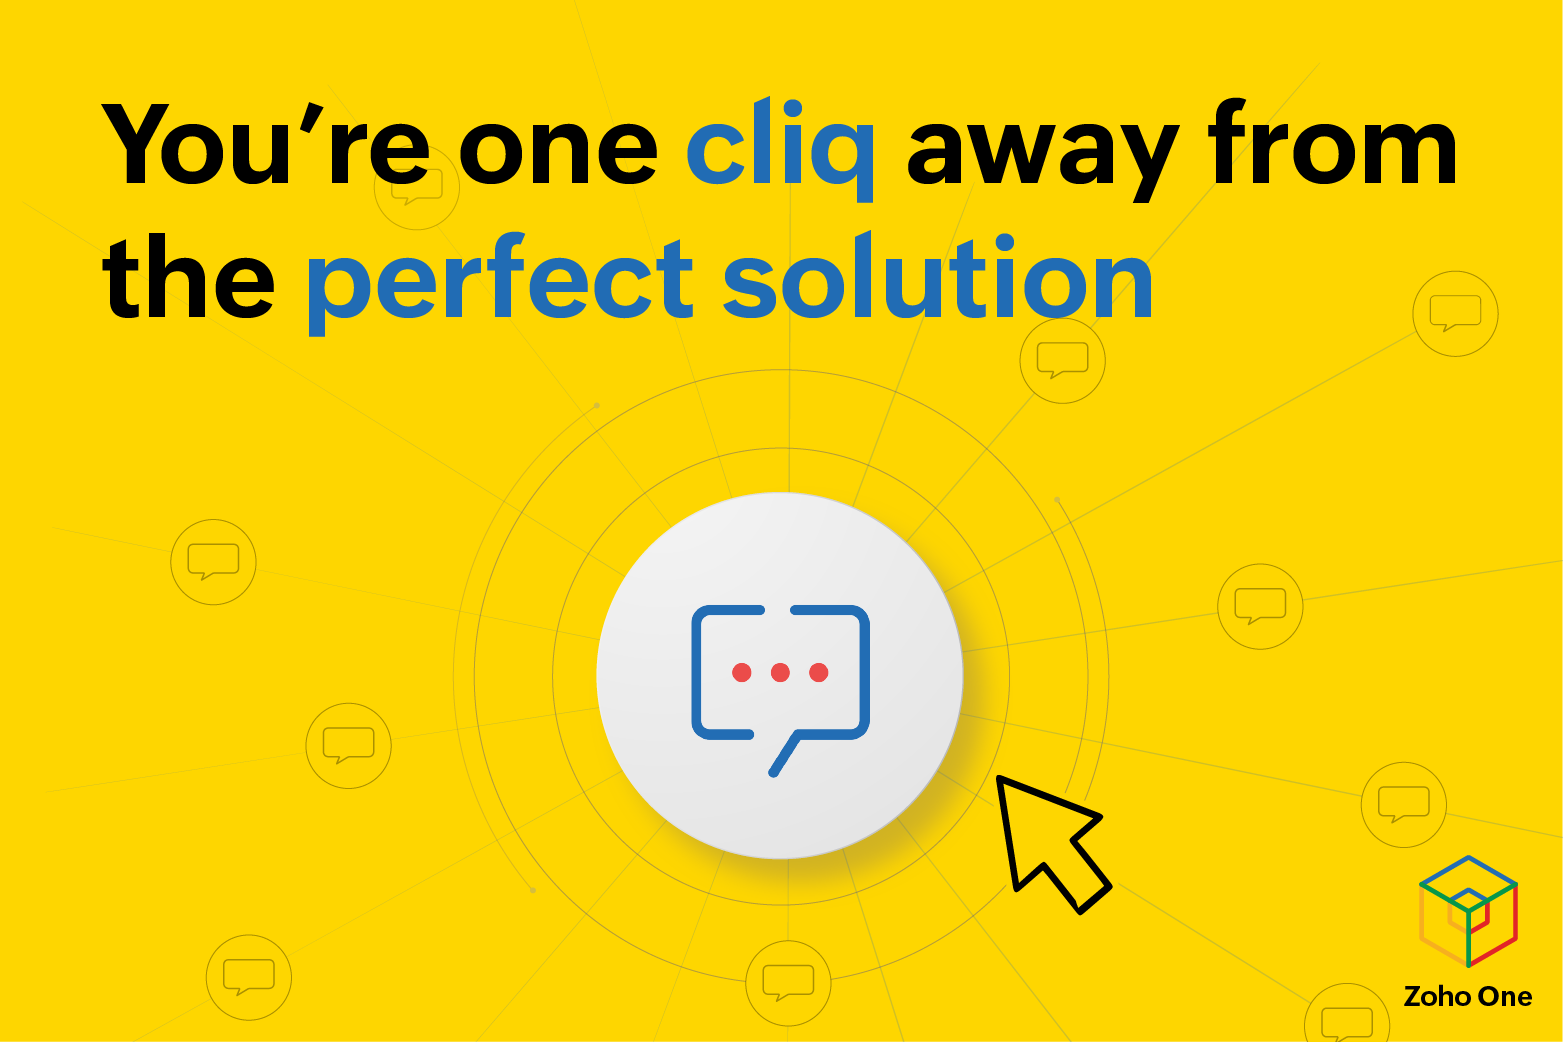 You are one Cliq away from the perfect solution - Zoho One 